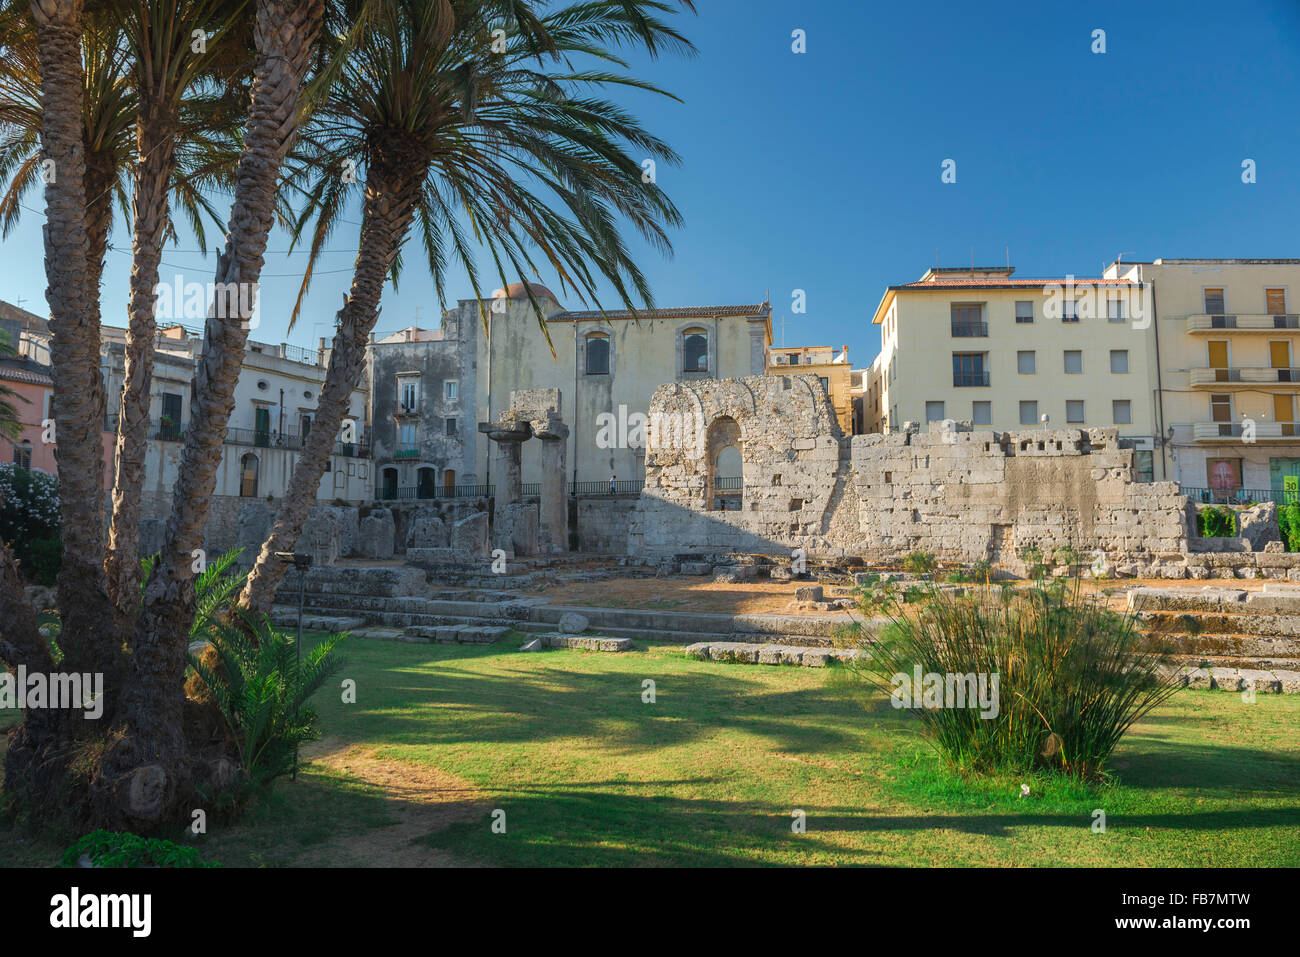 Syracuse Sicily Greek ruins, view of the historic remains of the ancient Greek temple of Apollo in the centre of Ortigia Island, Syracuse, Sicily. Stock Photo